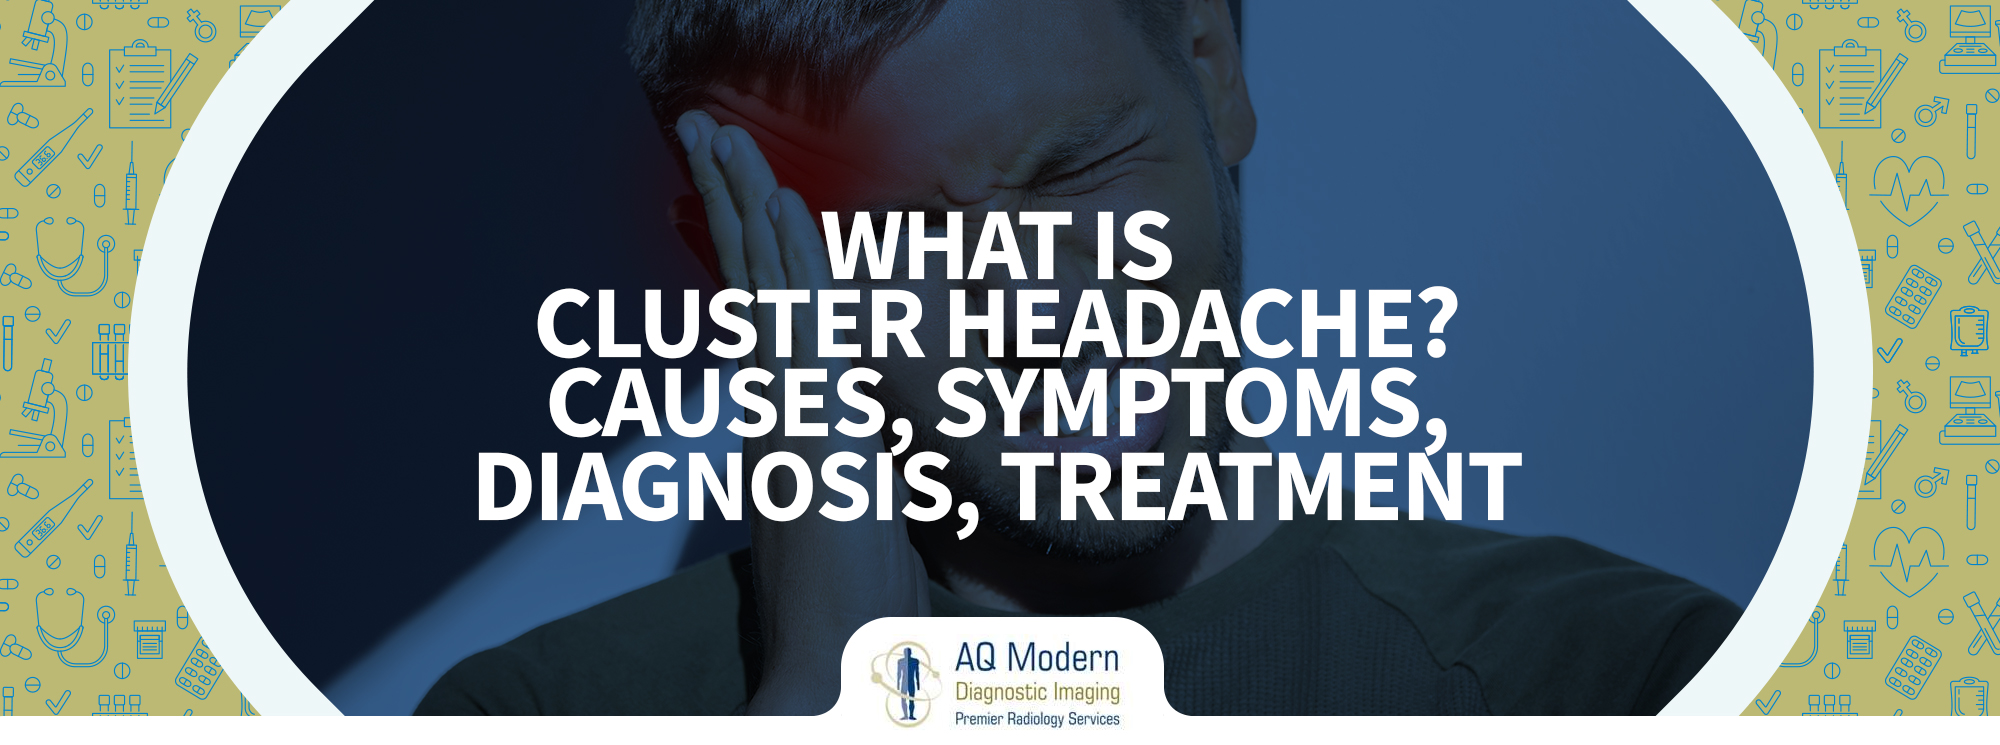 What is Cluster Headache? Causes, Symptoms, Diagnosis, Treatment